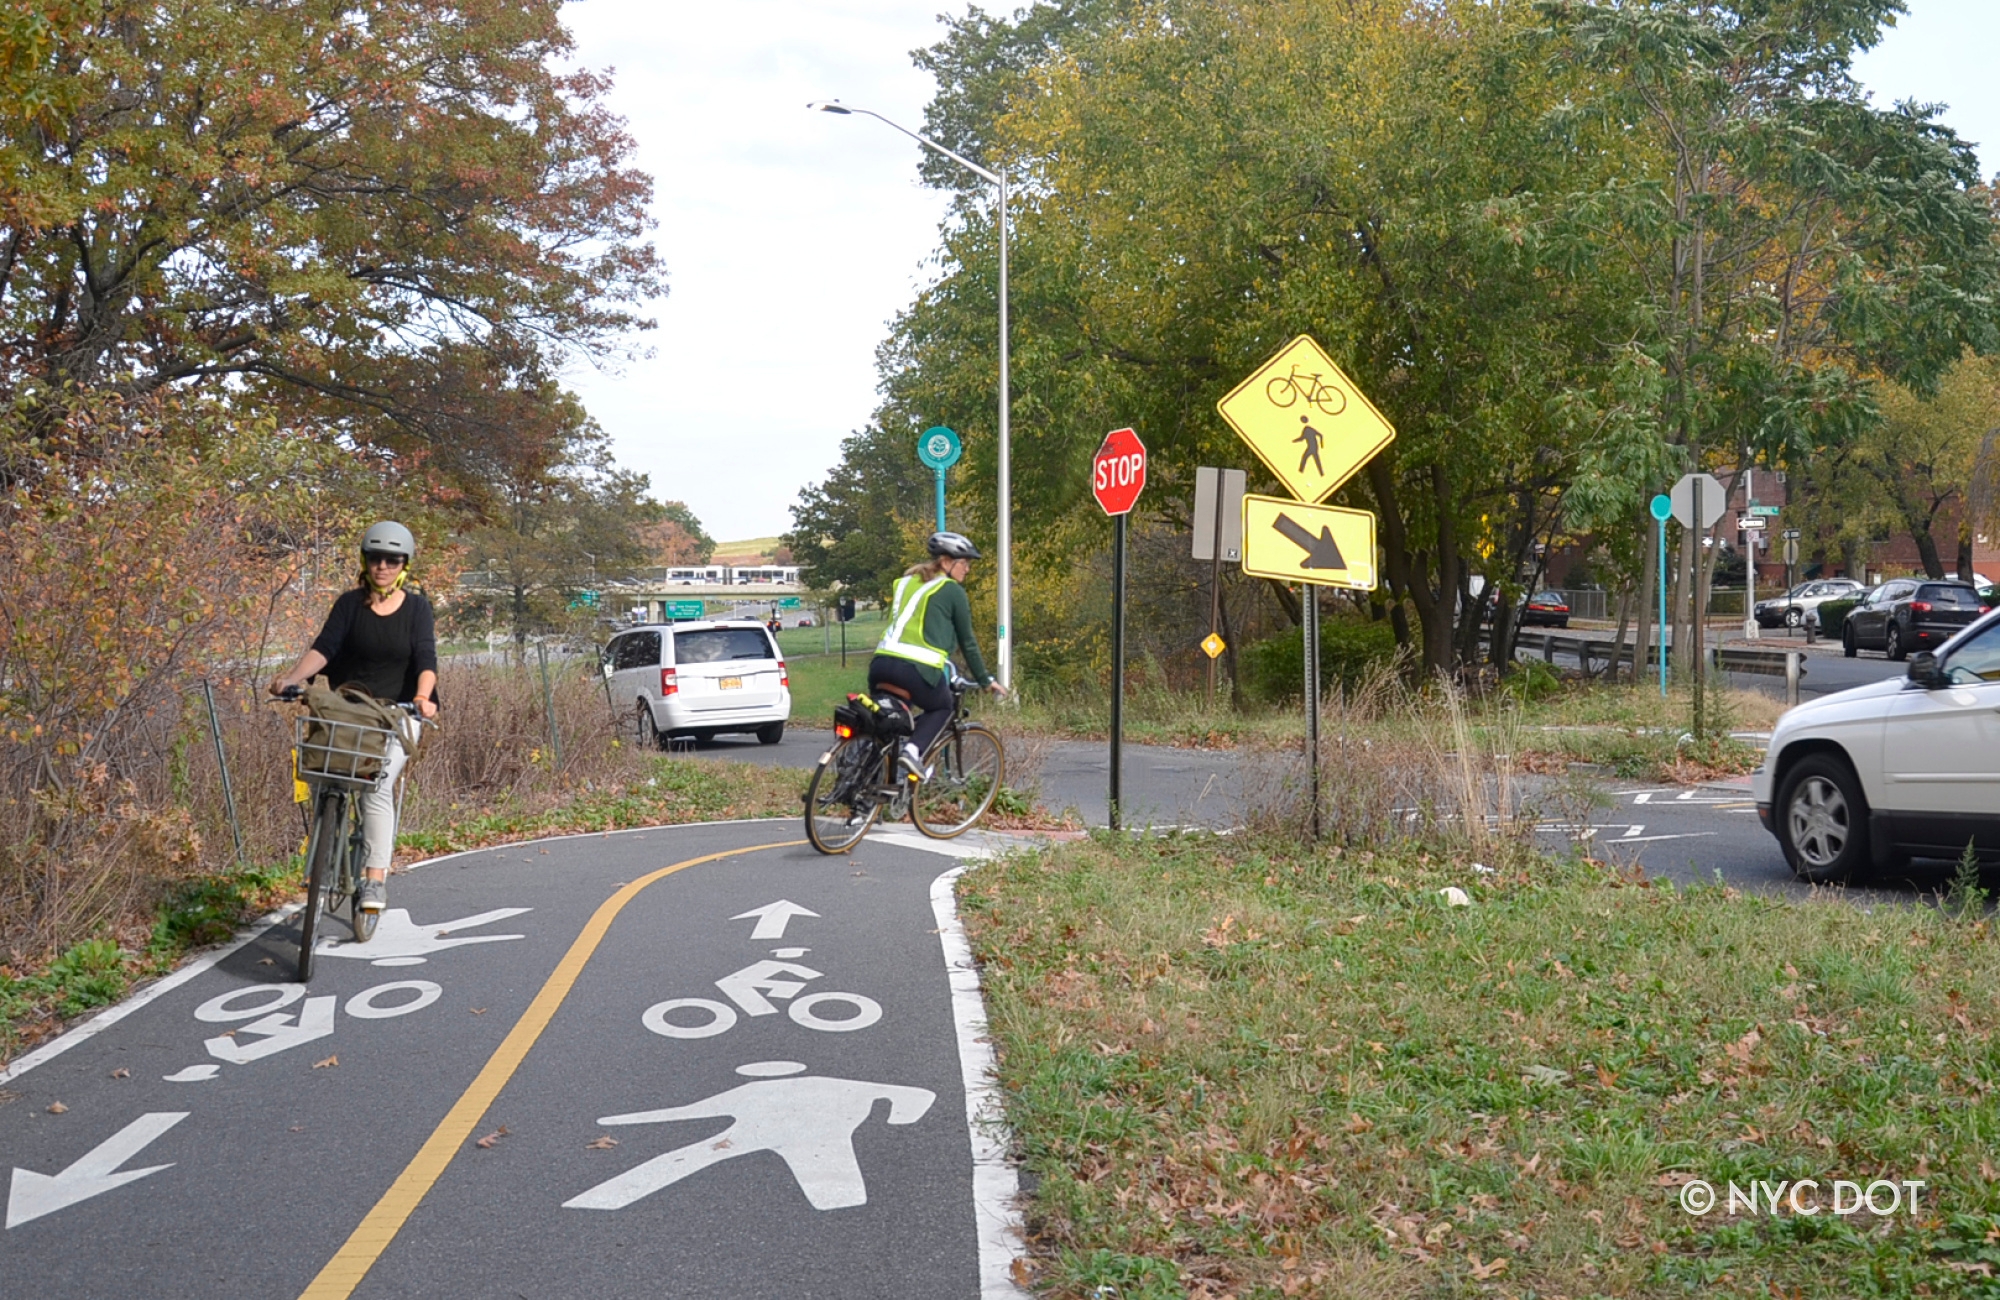 Two cyclists ride on painted separated bike lanes by Pelham Parkway in the Bronx.